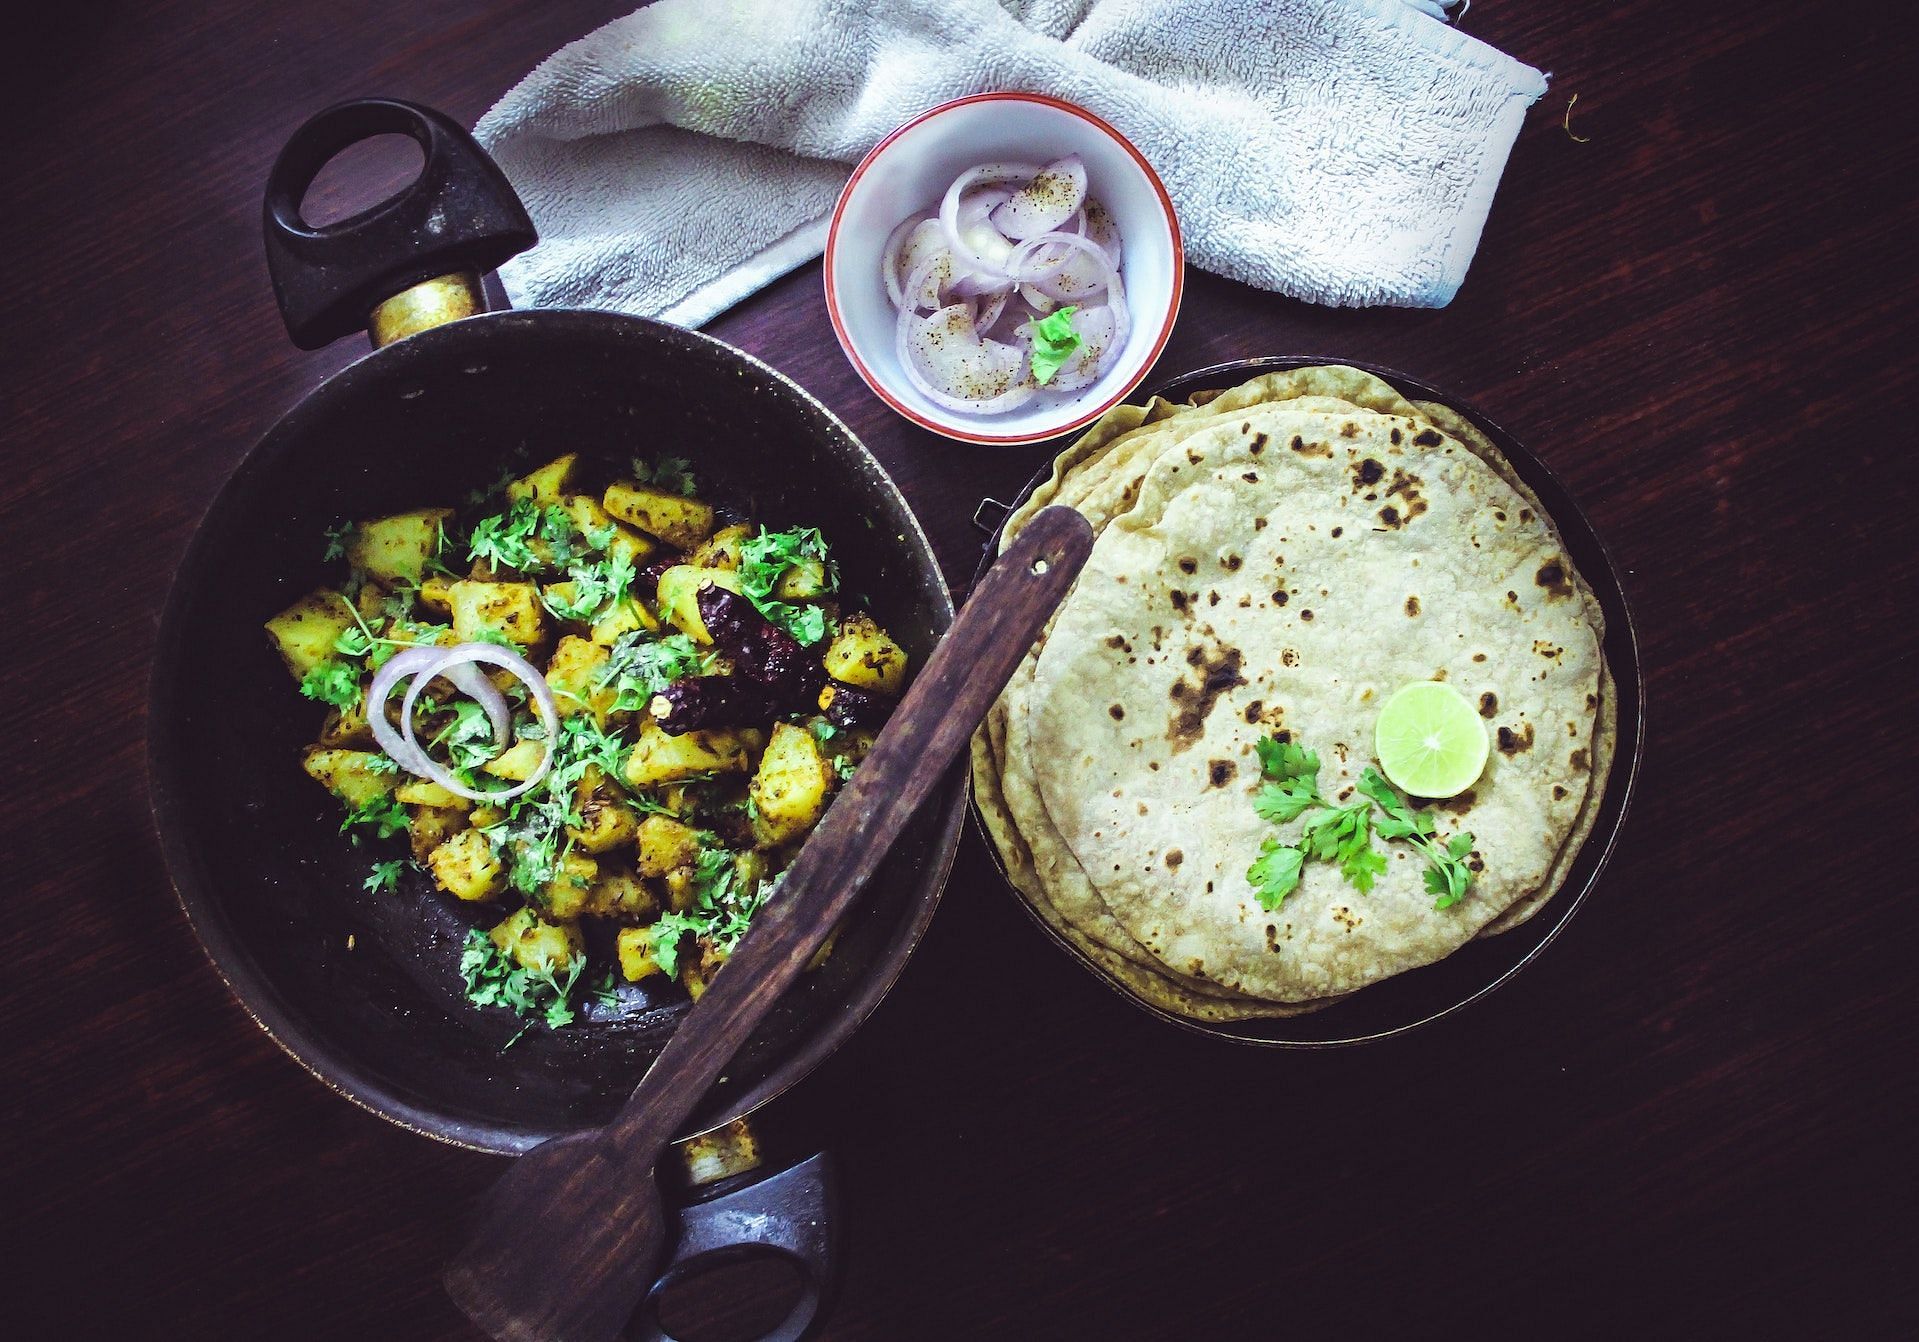 Indian cuisines are rich in spices and herbs. (Photo via Pexels/Surabhi Siddaiah)